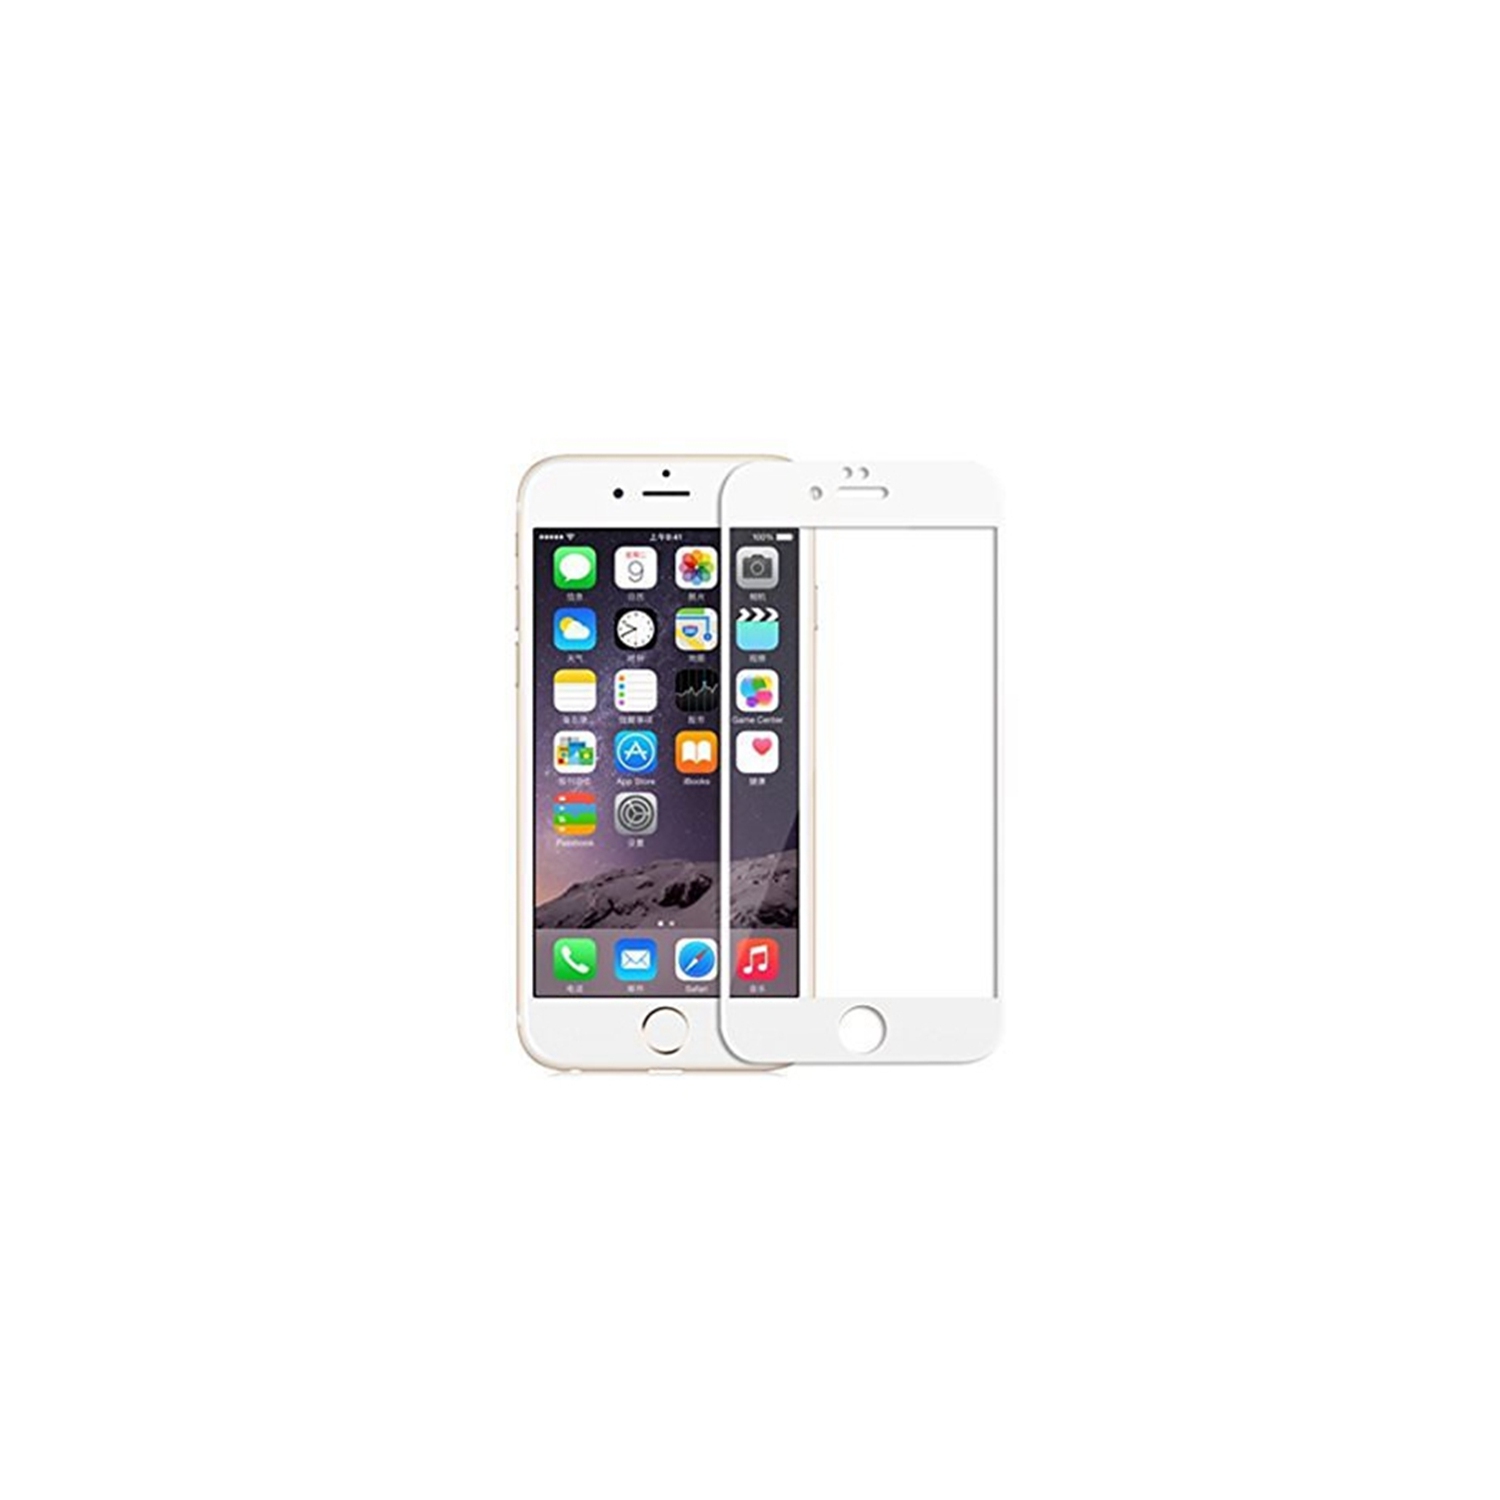 【CSmart】 Case Friendly 3D Curved Full Coverage Tempered Glass Screen Protector for iPhone 6 Plus / 6S Plus (5.5"), White